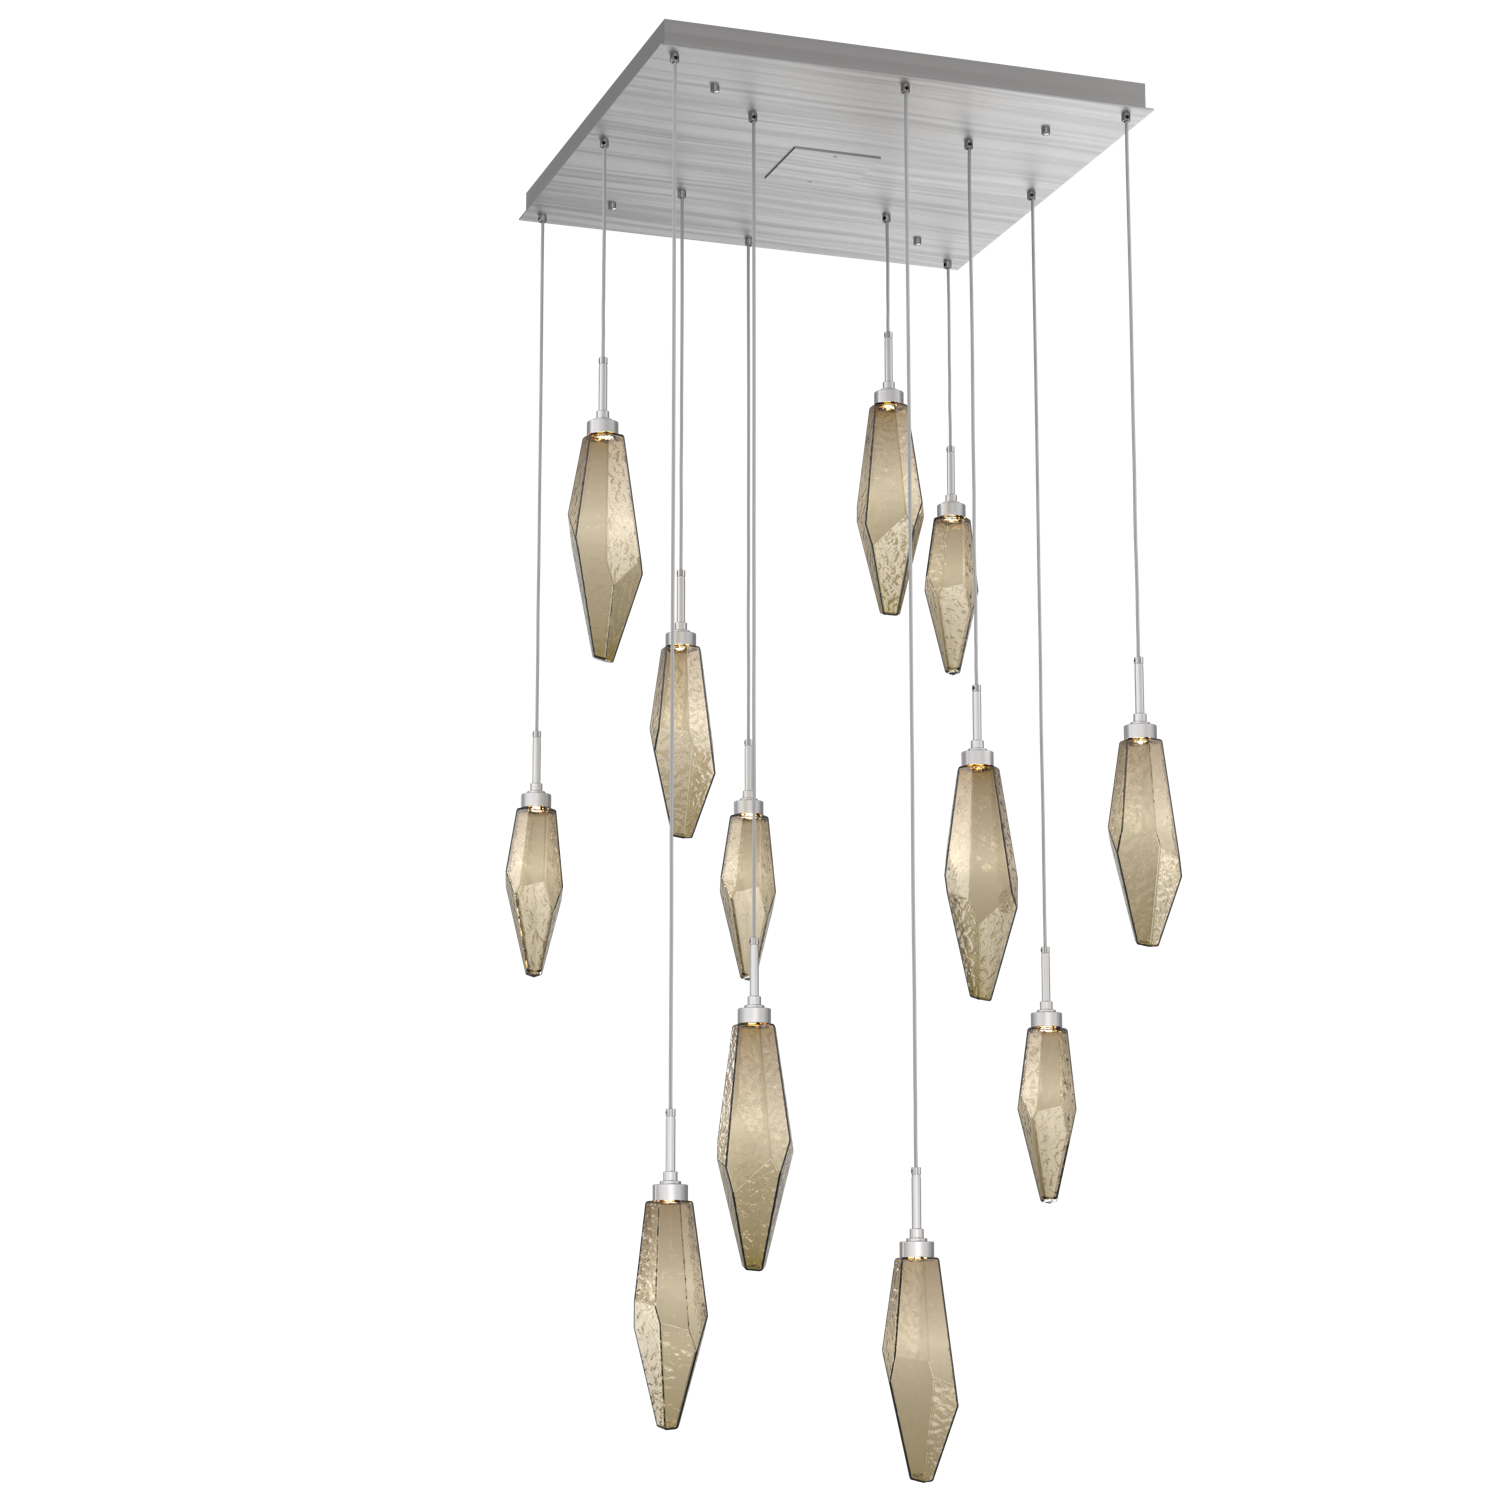 CHB0050-12-SN-CB-Hammerton-Studio-Rock-Crystal-12-light-square-pendant-chandelier-with-satin-nickel-finish-and-chilled-bronze-blown-glass-shades-and-LED-lamping